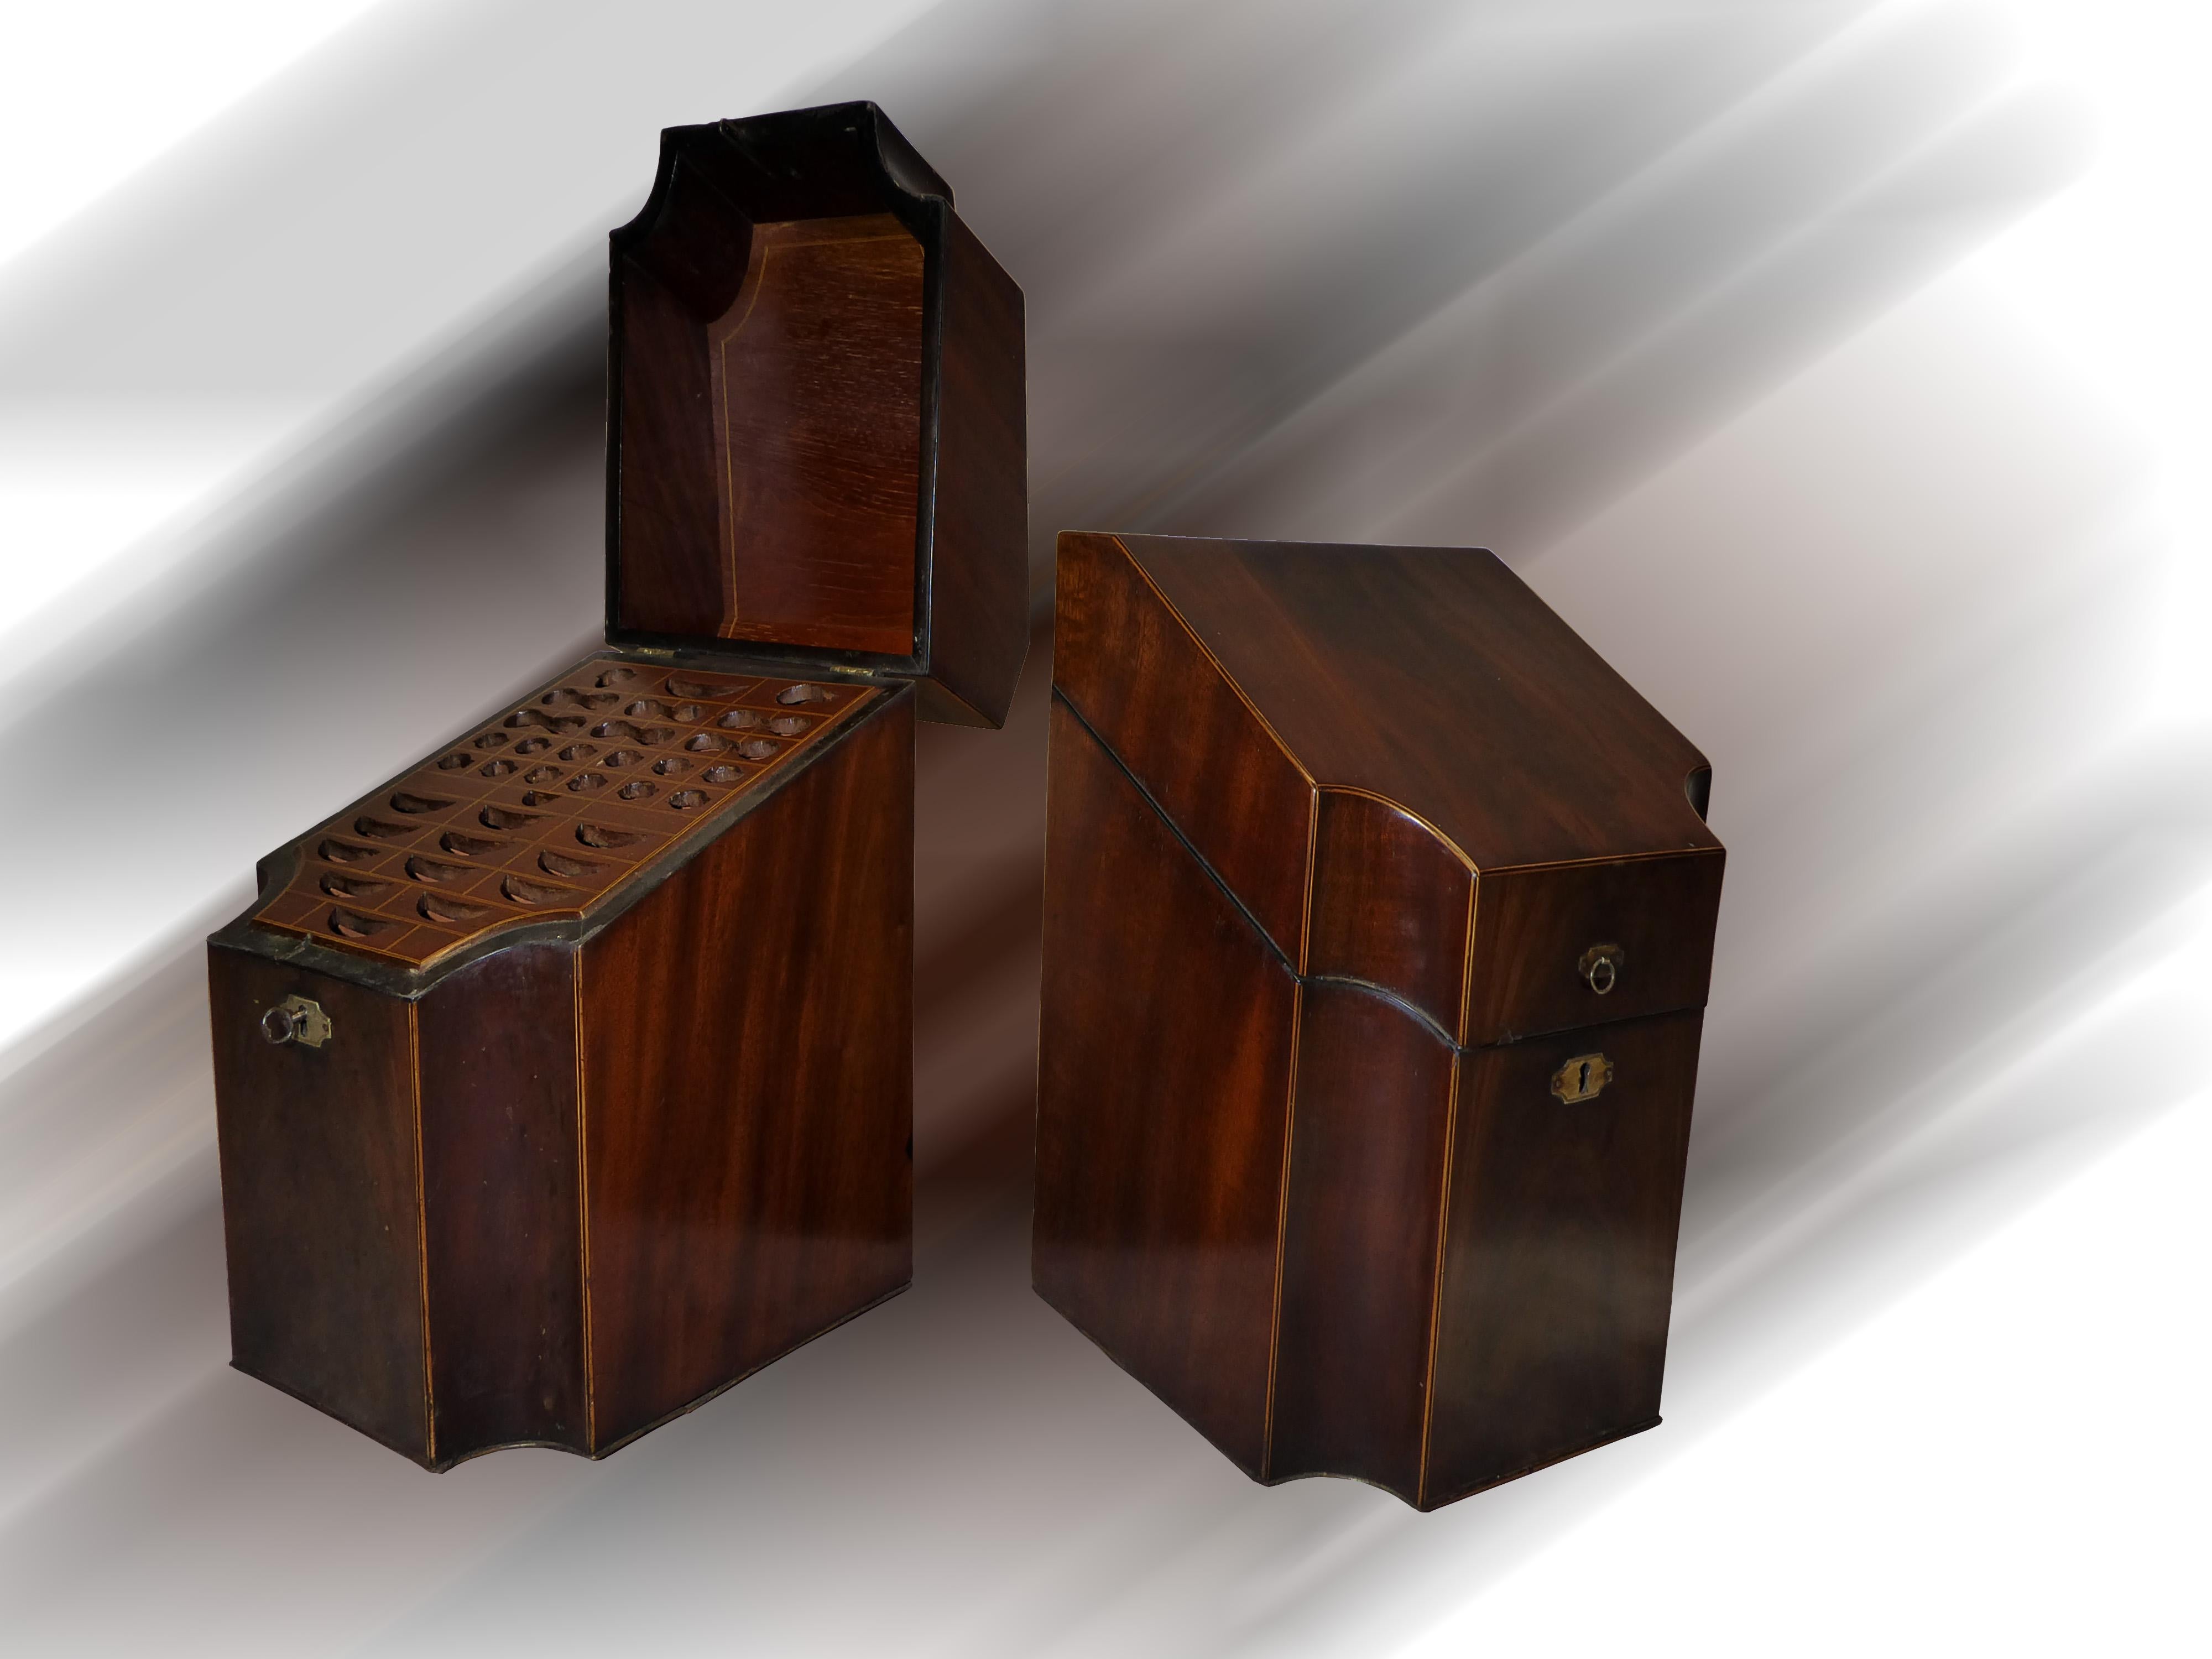 Exceptional Pair of cutlery cases georgian mahogany silver mounts original.
In beautiful condition, elegant items for your dining room,  (sorry we can not include the silver cutlery illustrated)   Such items as these hold a special place of honour